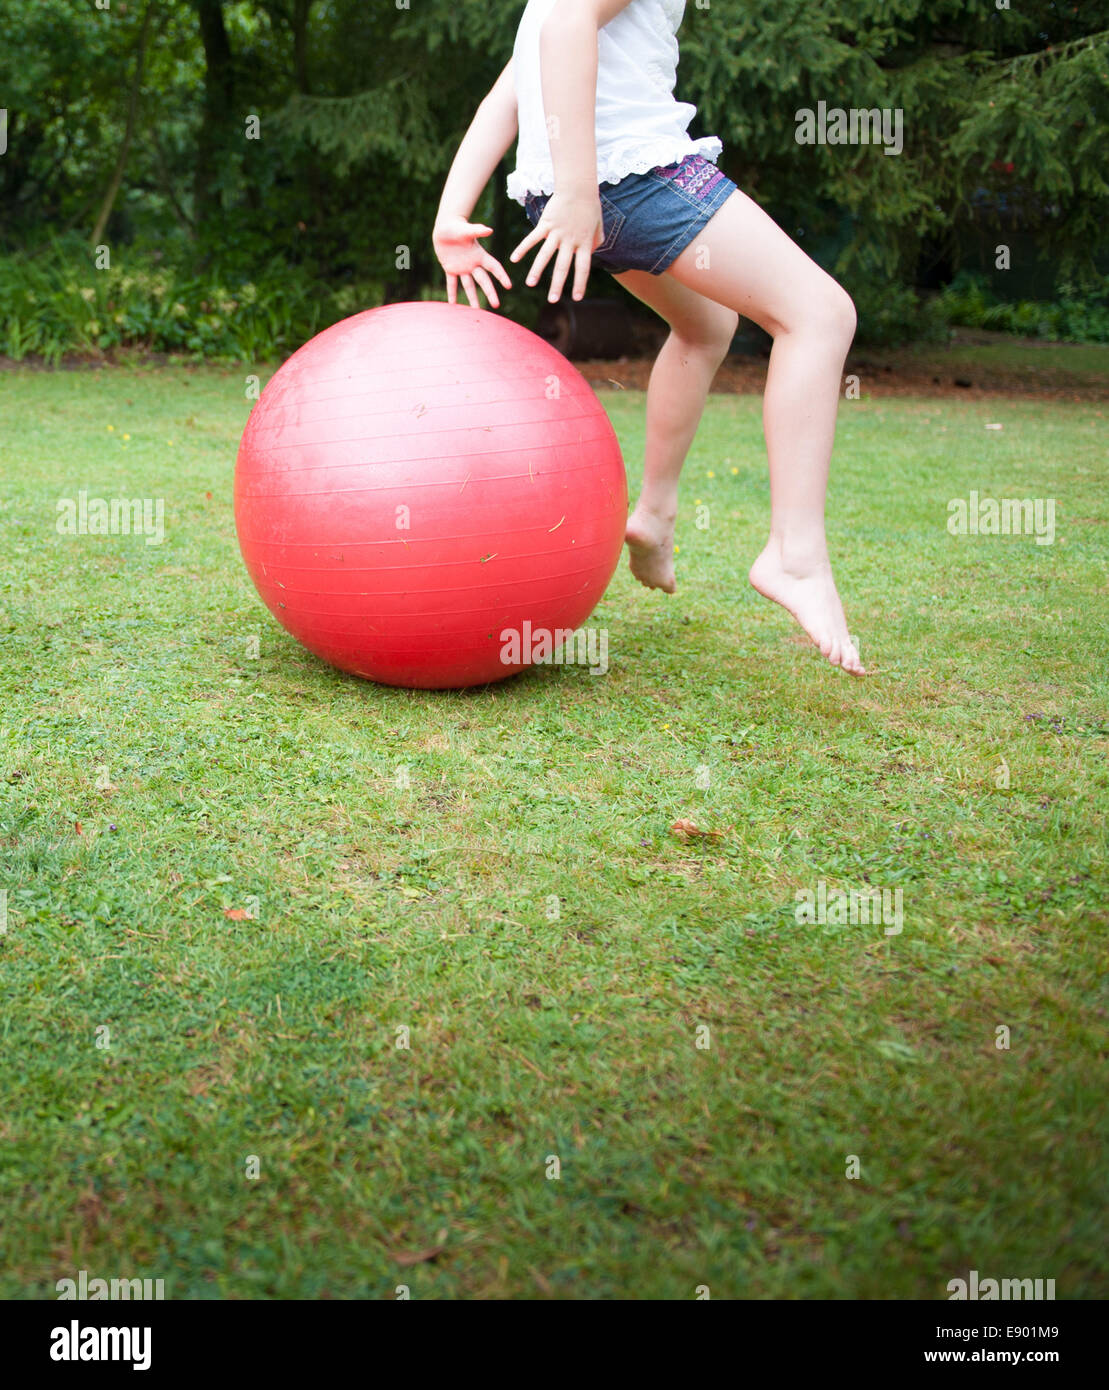 Child on a space hopper in a garden Stock Photo